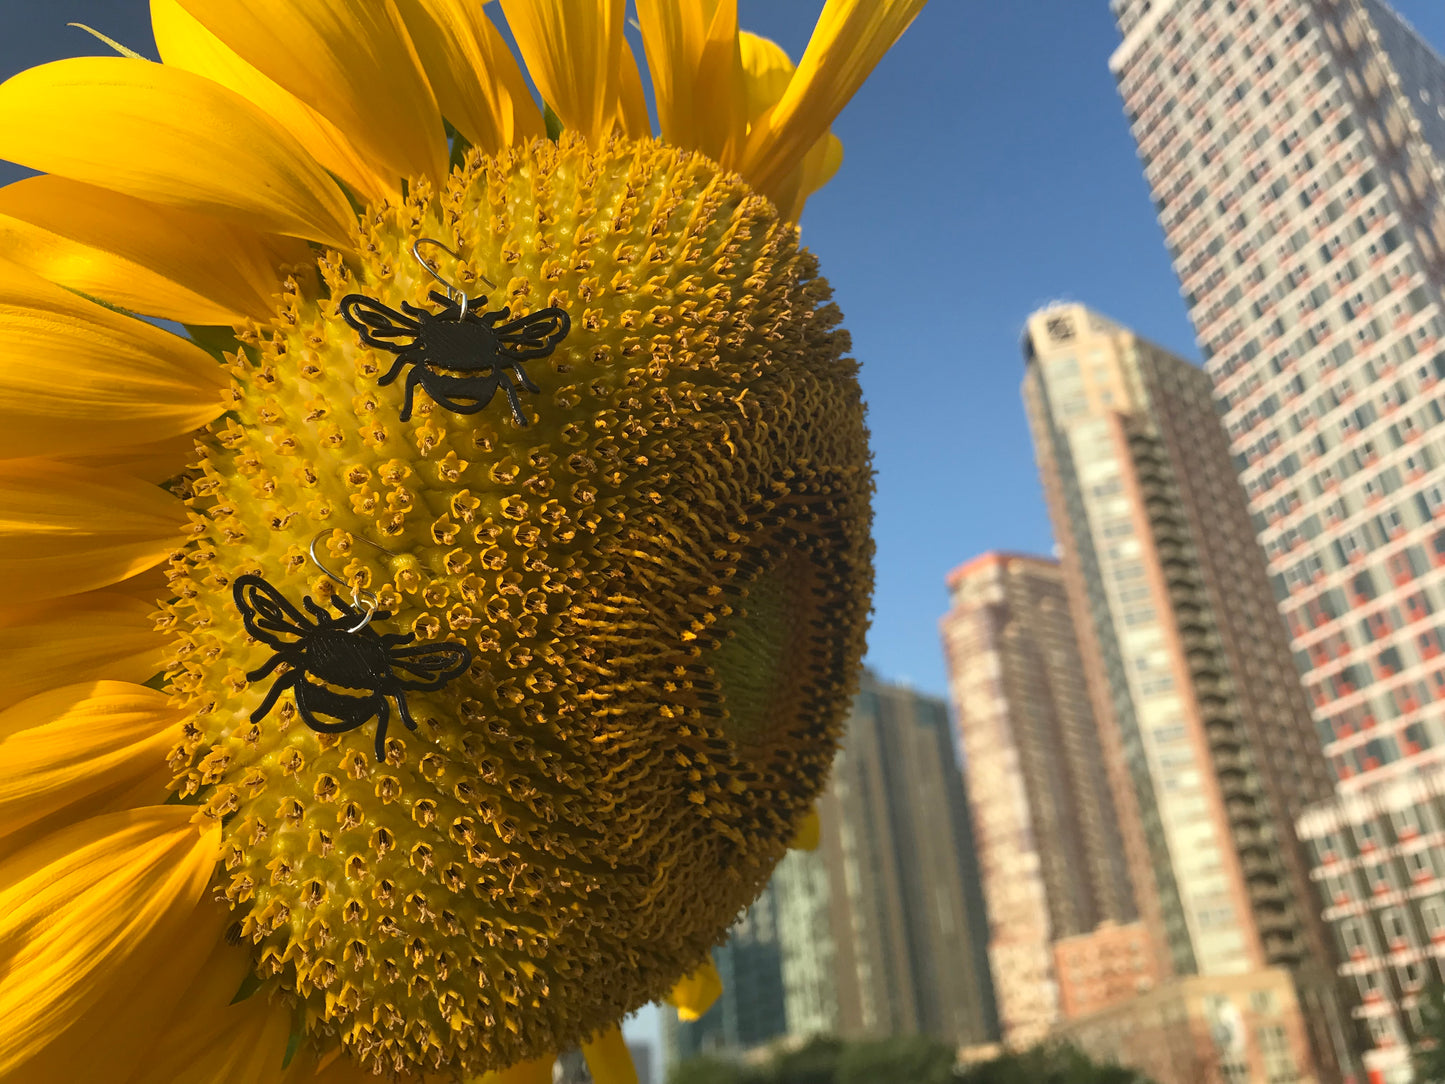 In the foreground is a large yellow sunflower. In the background is a bright blue sky with skyscraper buildings. Hanging off of the sunflower are two R+D earrings; They are shaped like bumble bees straight on; they have delicate veins in the wings and the body includes the quintessential stripes of a bee that are fuzzy for collecting pollen.